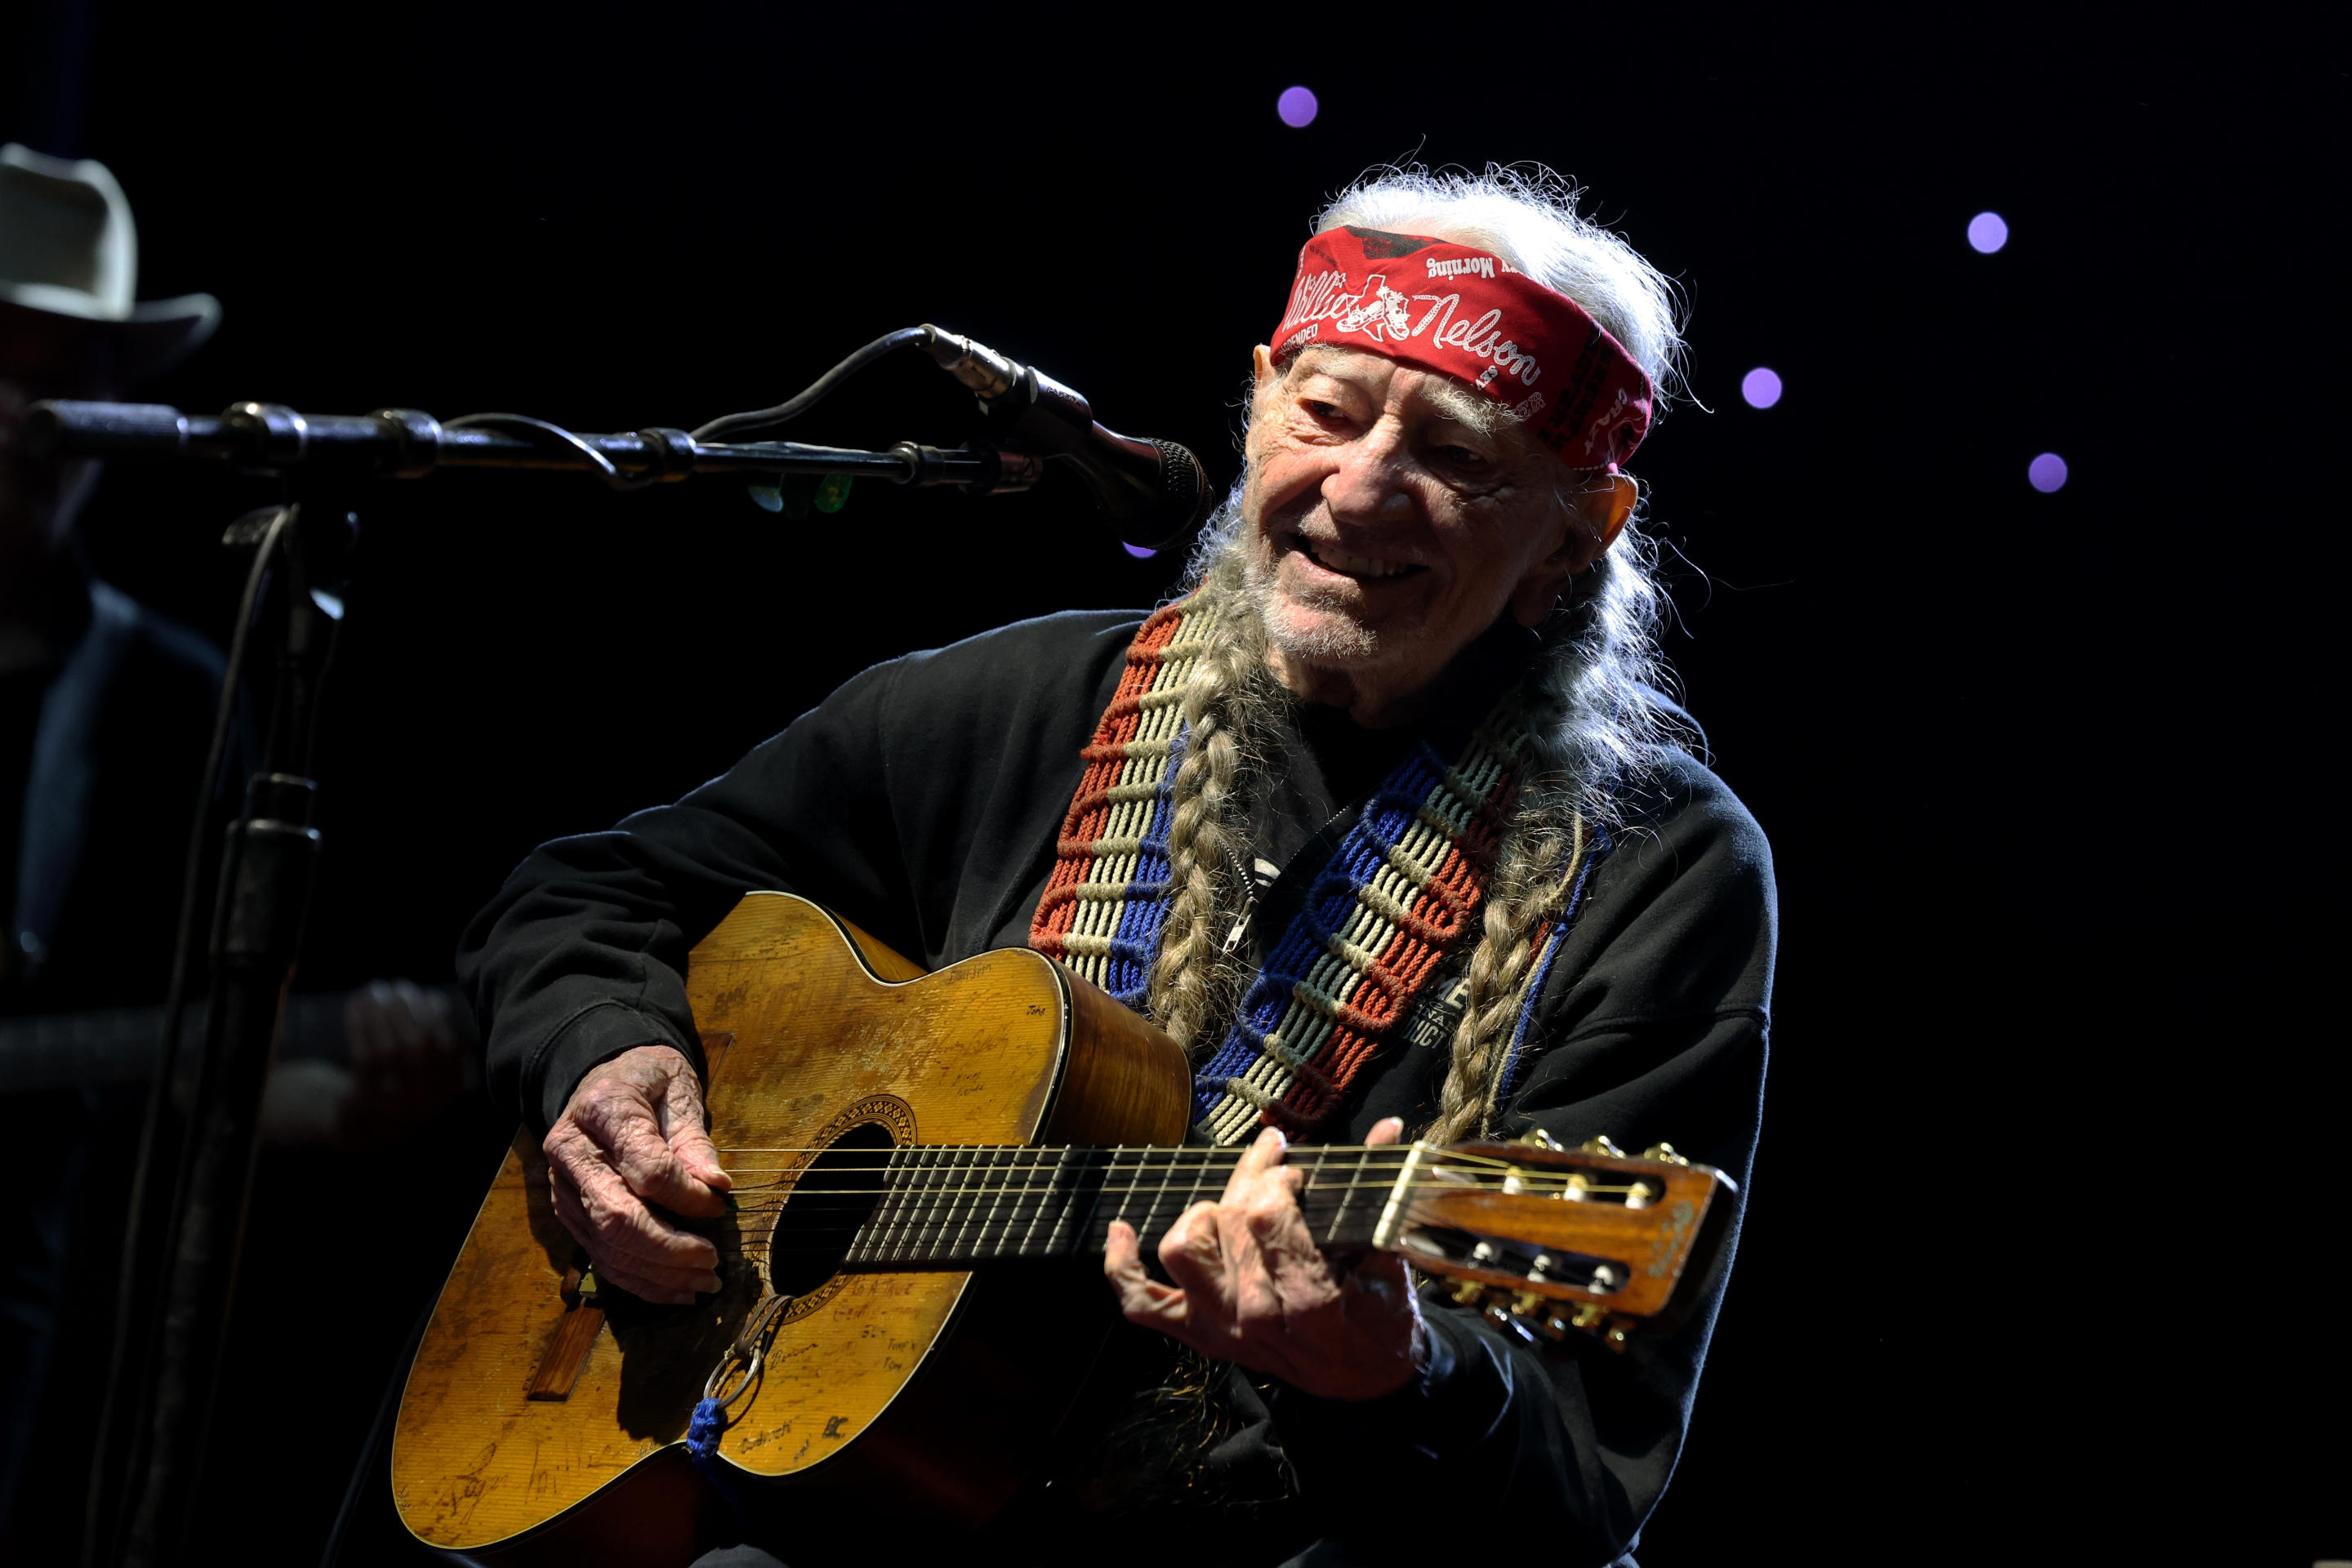 Willie Nelson smiles as he performs onstage in Texas.